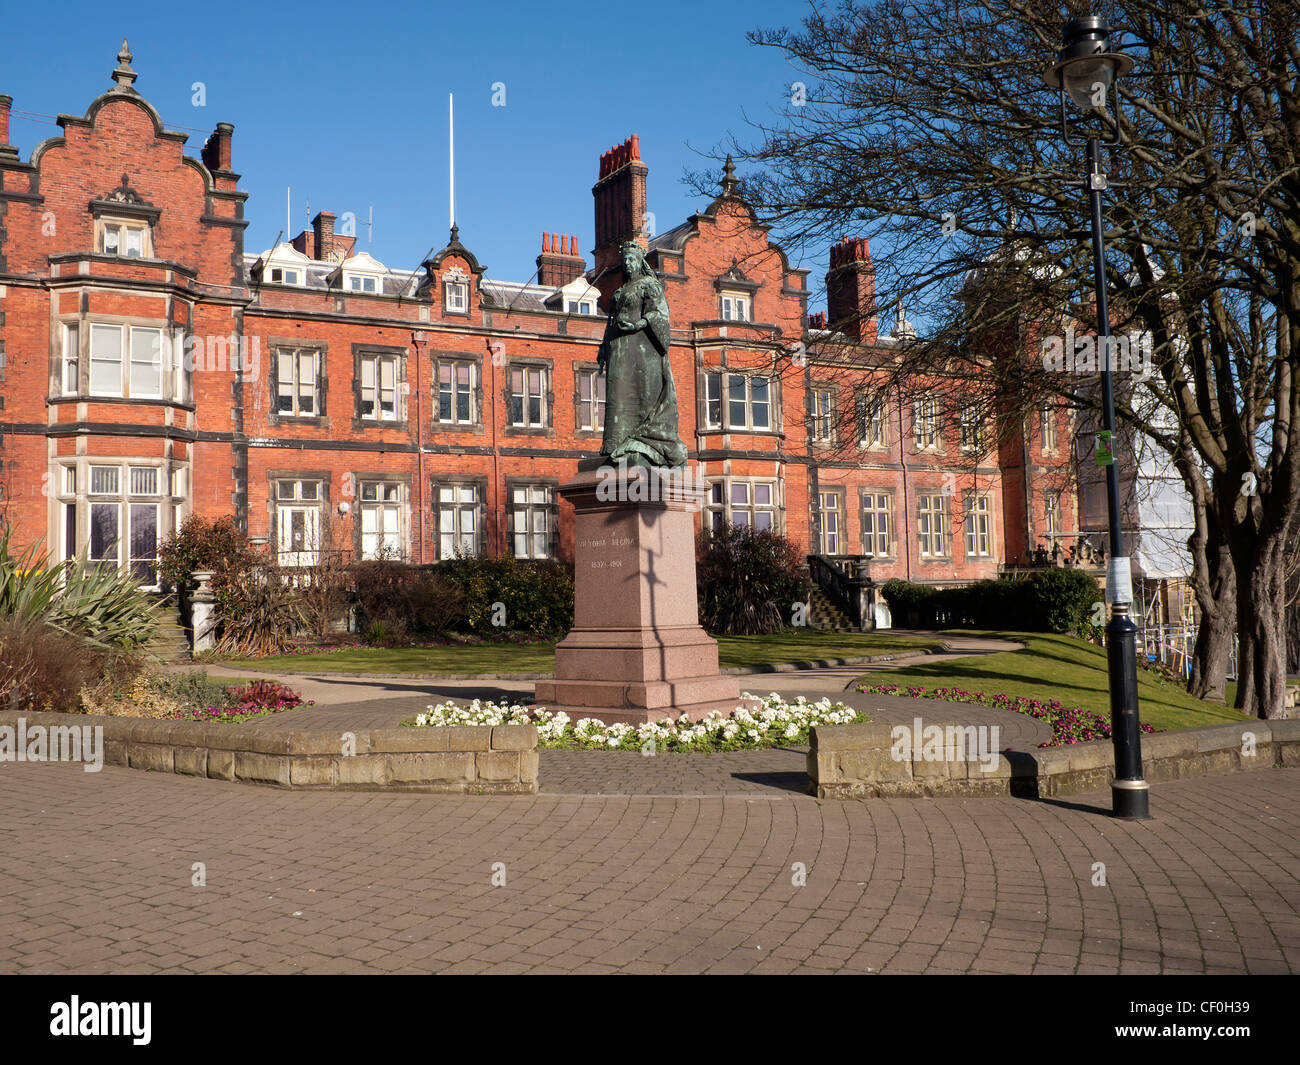 Scarborough Town Hall with a statue of Queen Victoria in front built for a banker in 1846 purchased by Scarborough Council 1899 Stock Photo